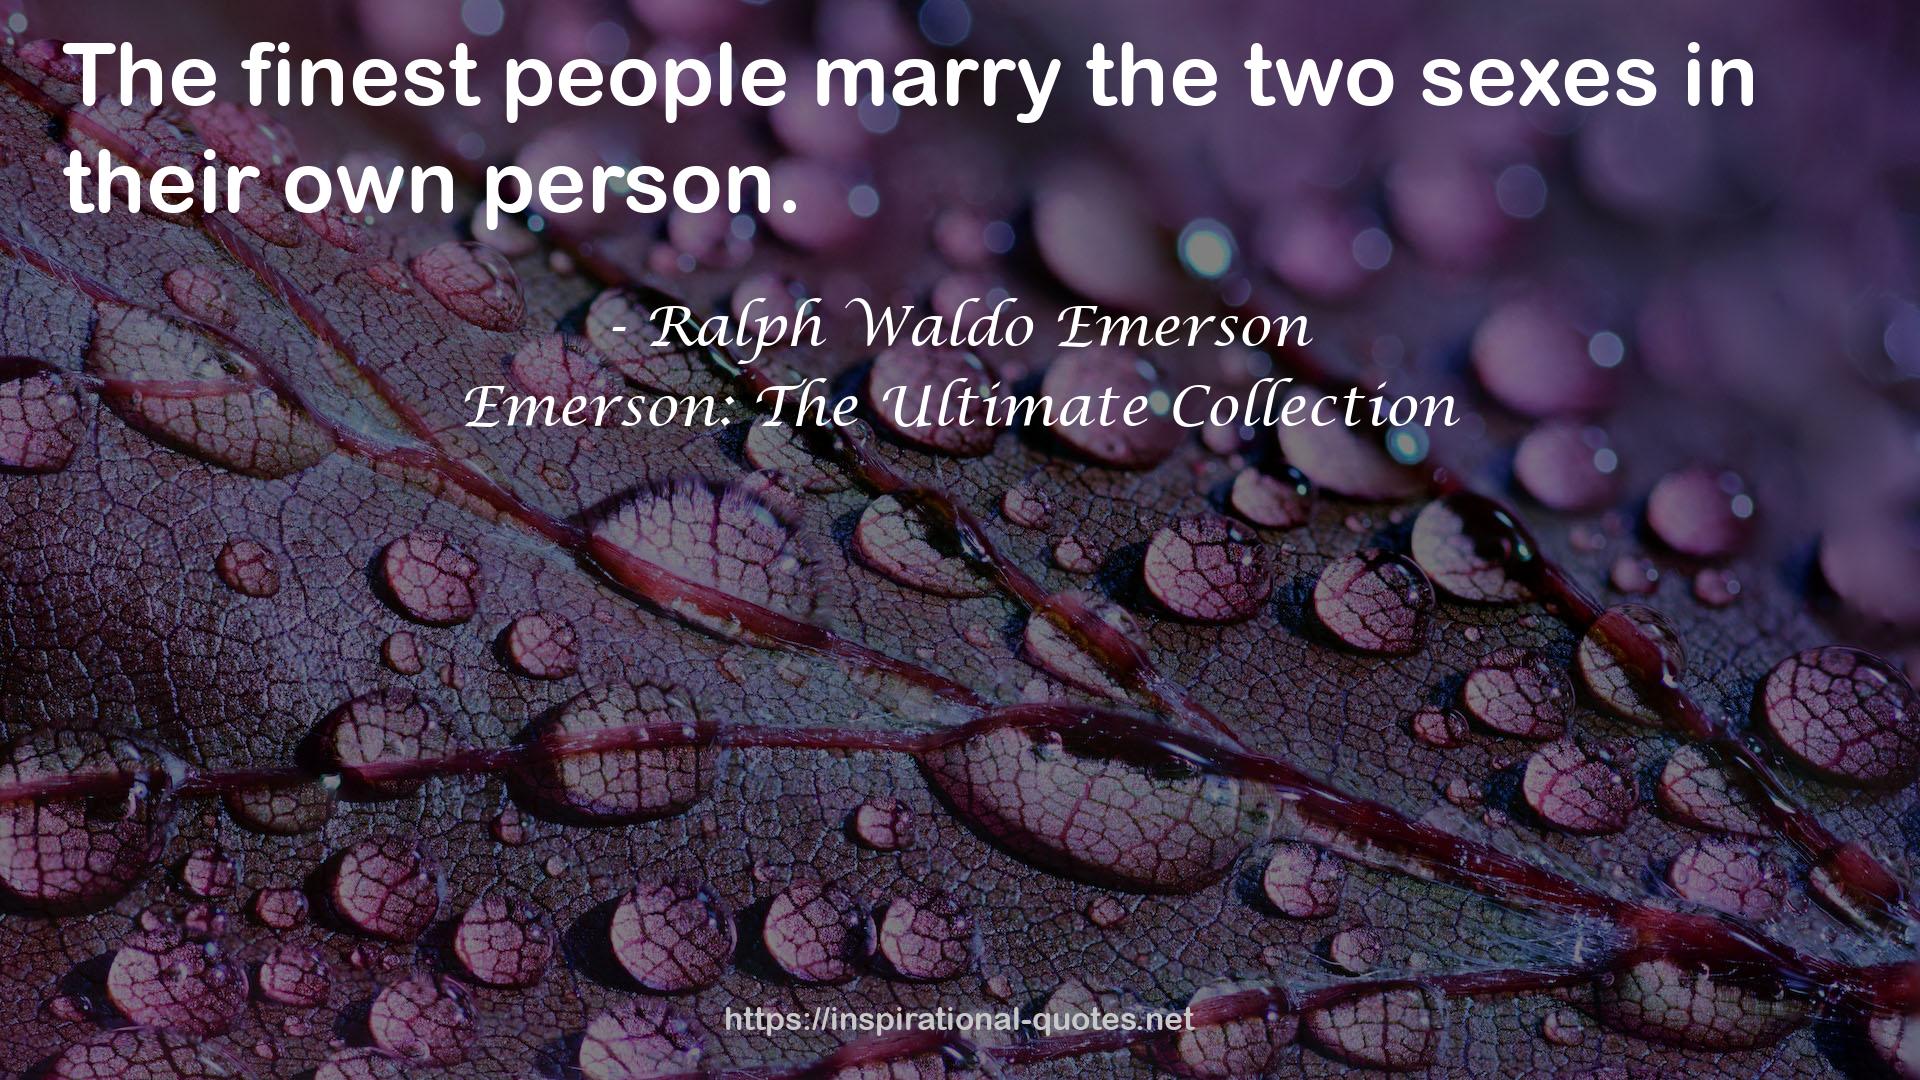 Emerson: The Ultimate Collection QUOTES